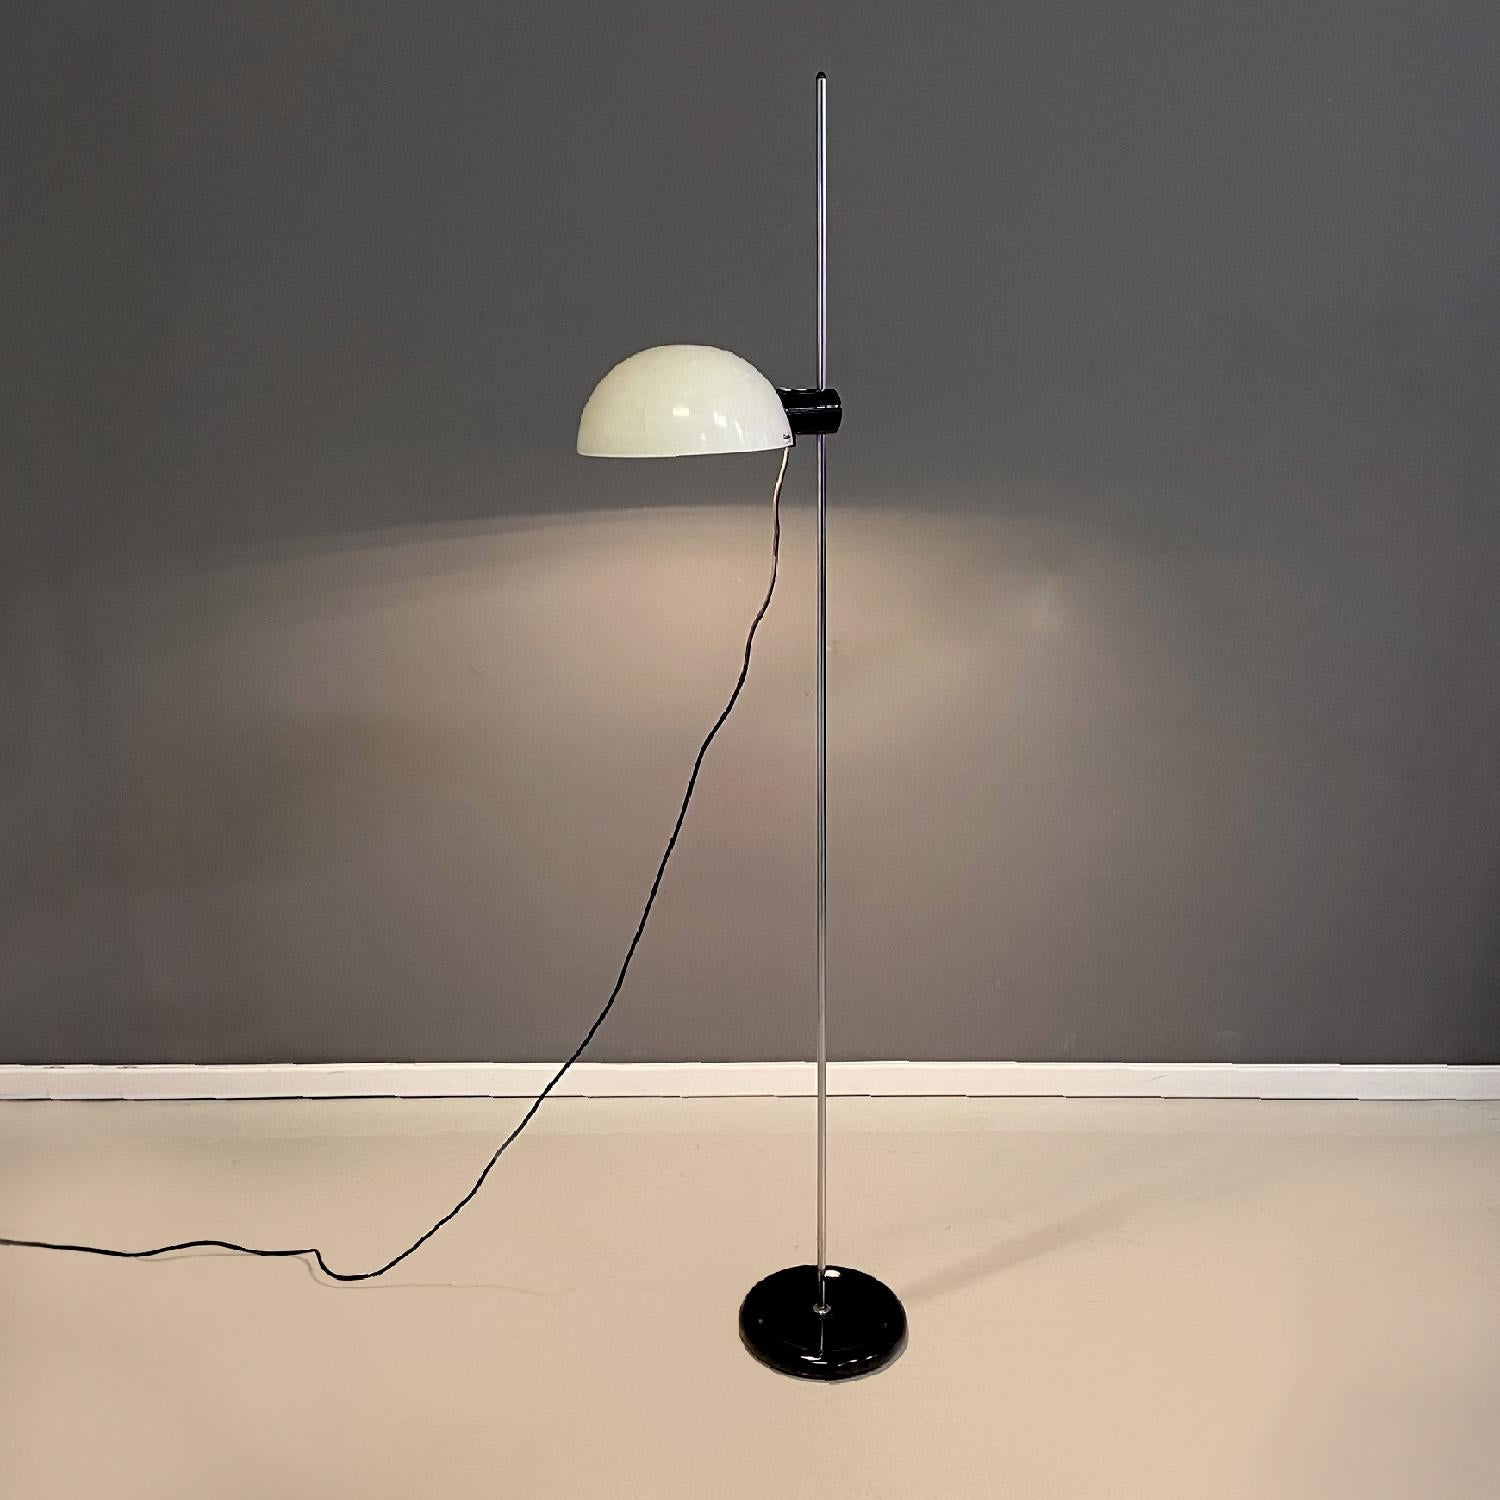 Italian modern chromed metal white black plastic floor lamp by Guzzini, 1970s
Round base floor lamp. The structure is made of chromed metal. The diffuser is in milky white plastic and is adjustable in height, it is connected to the structure via a